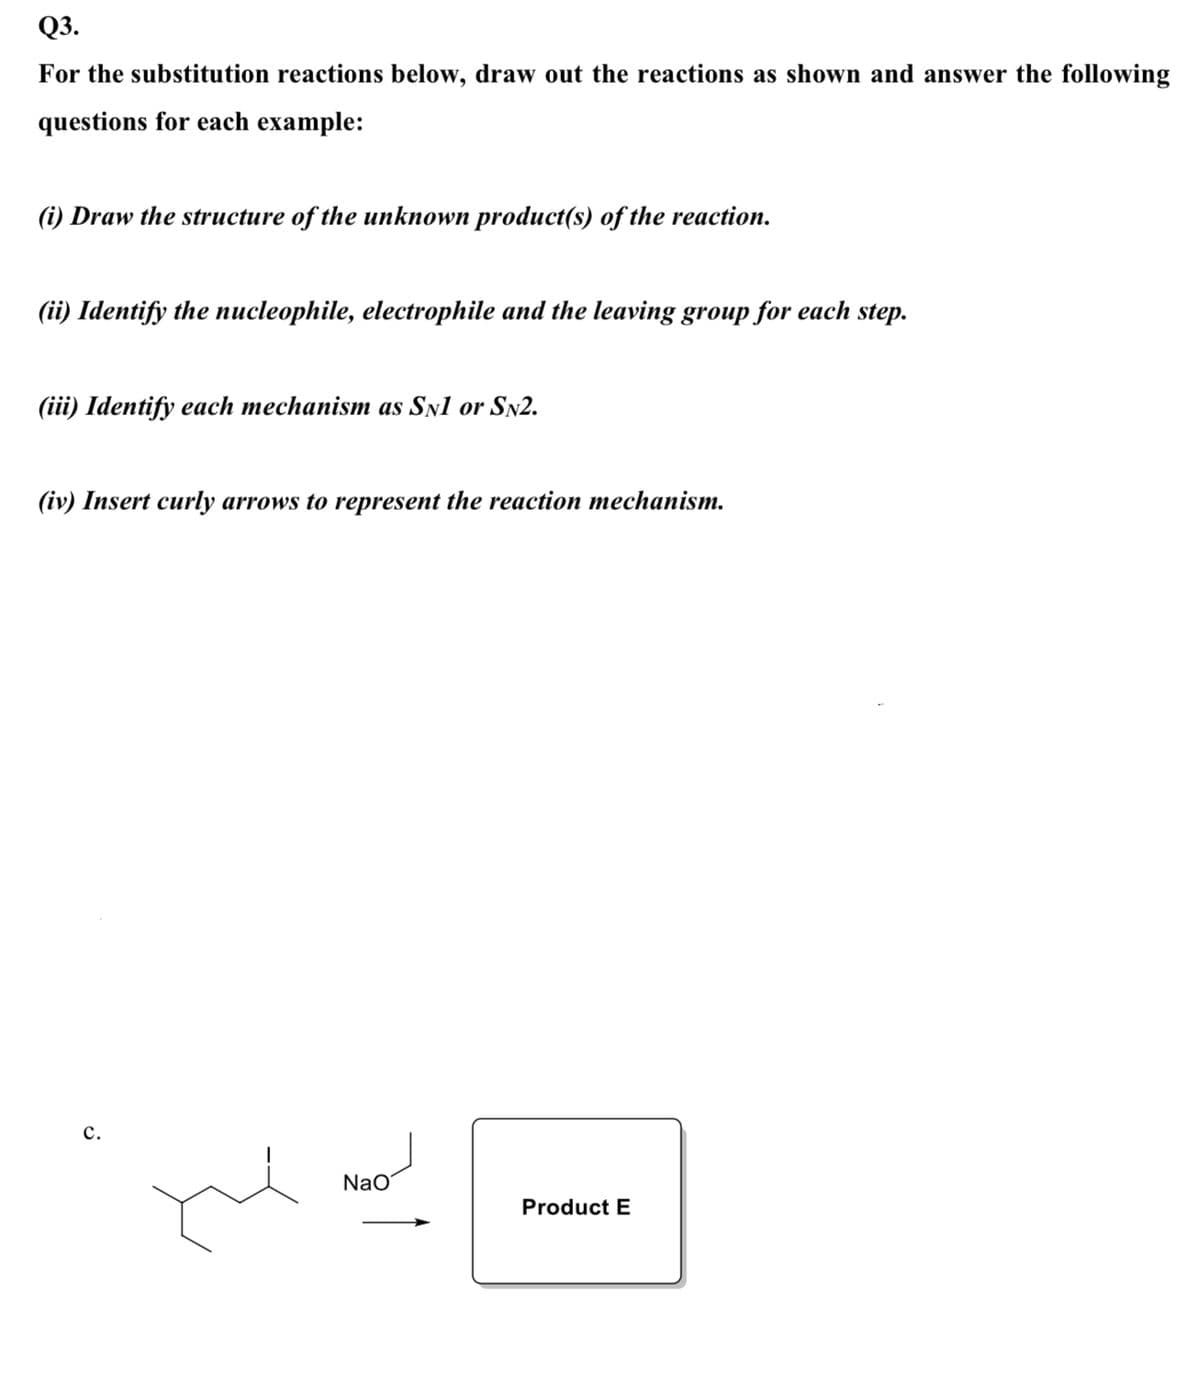 Q3.
For the substitution reactions below, draw out the reactions as shown and answer the following
questions for each example:
(i) Draw the structure of the unknown product(s) of the reaction.
(ii) Identify the nucleophile, electrophile and the leaving group for each step.
(iii) Identify each mechanism as Sn1 or SN2.
(iv) Insert curly arrows to represent the reaction mechanism.
с.
Na
Product E
